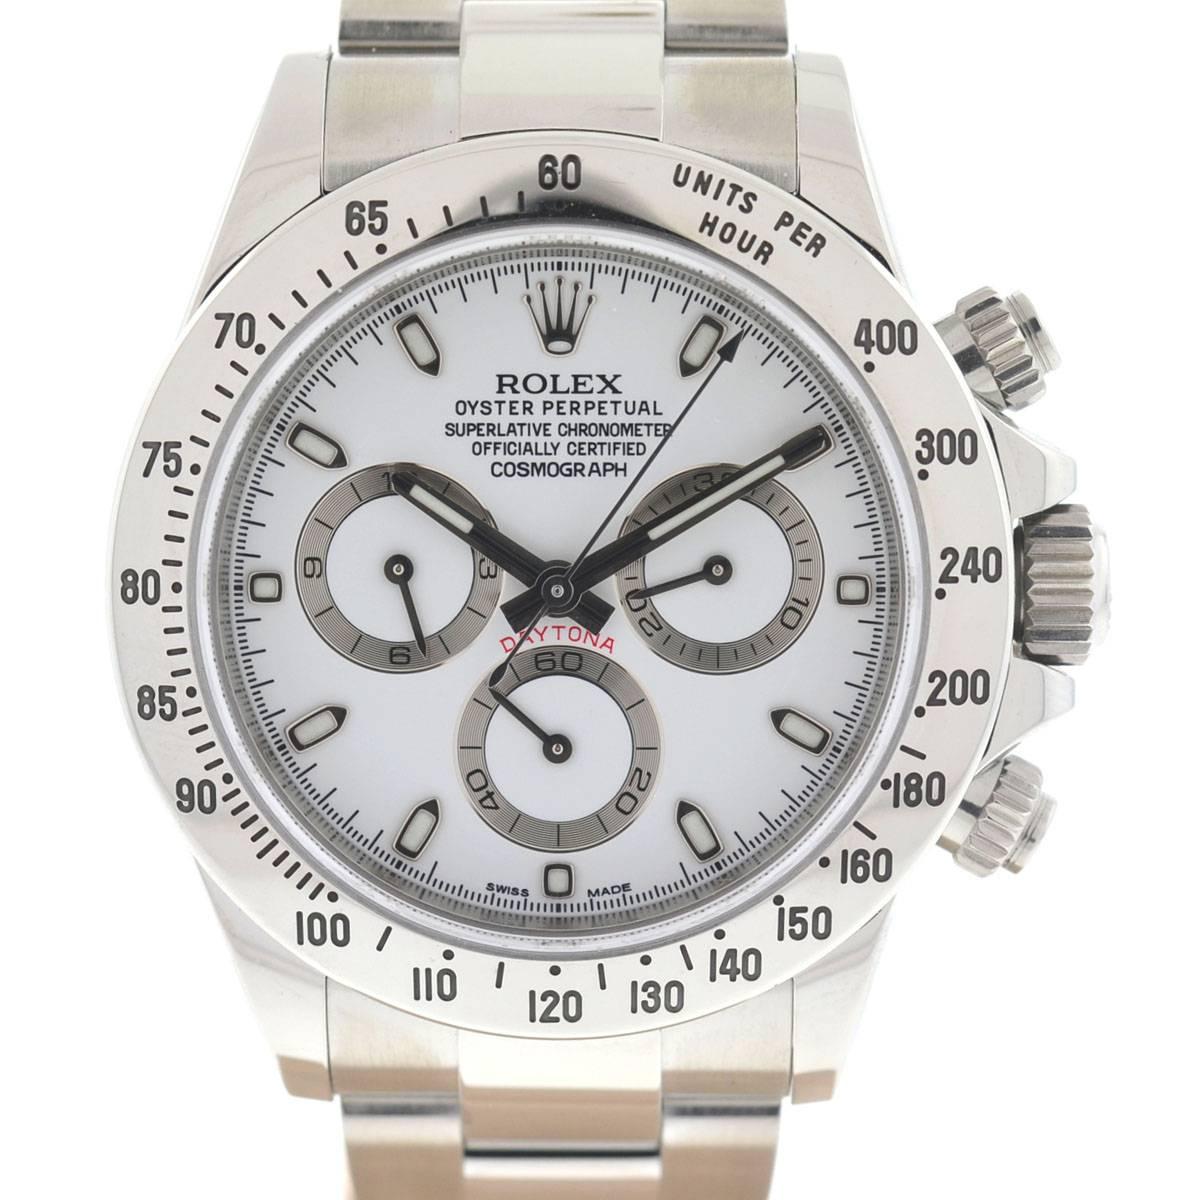 Company - Rolex
Style - Dress/Formal
Model - Daytona
Reference Number - 116520 Random Serial
Case Metal - Stainless Steel
Case Measurement - 40 mm 
Bracelet - Stainless Steel Fits a 6.75